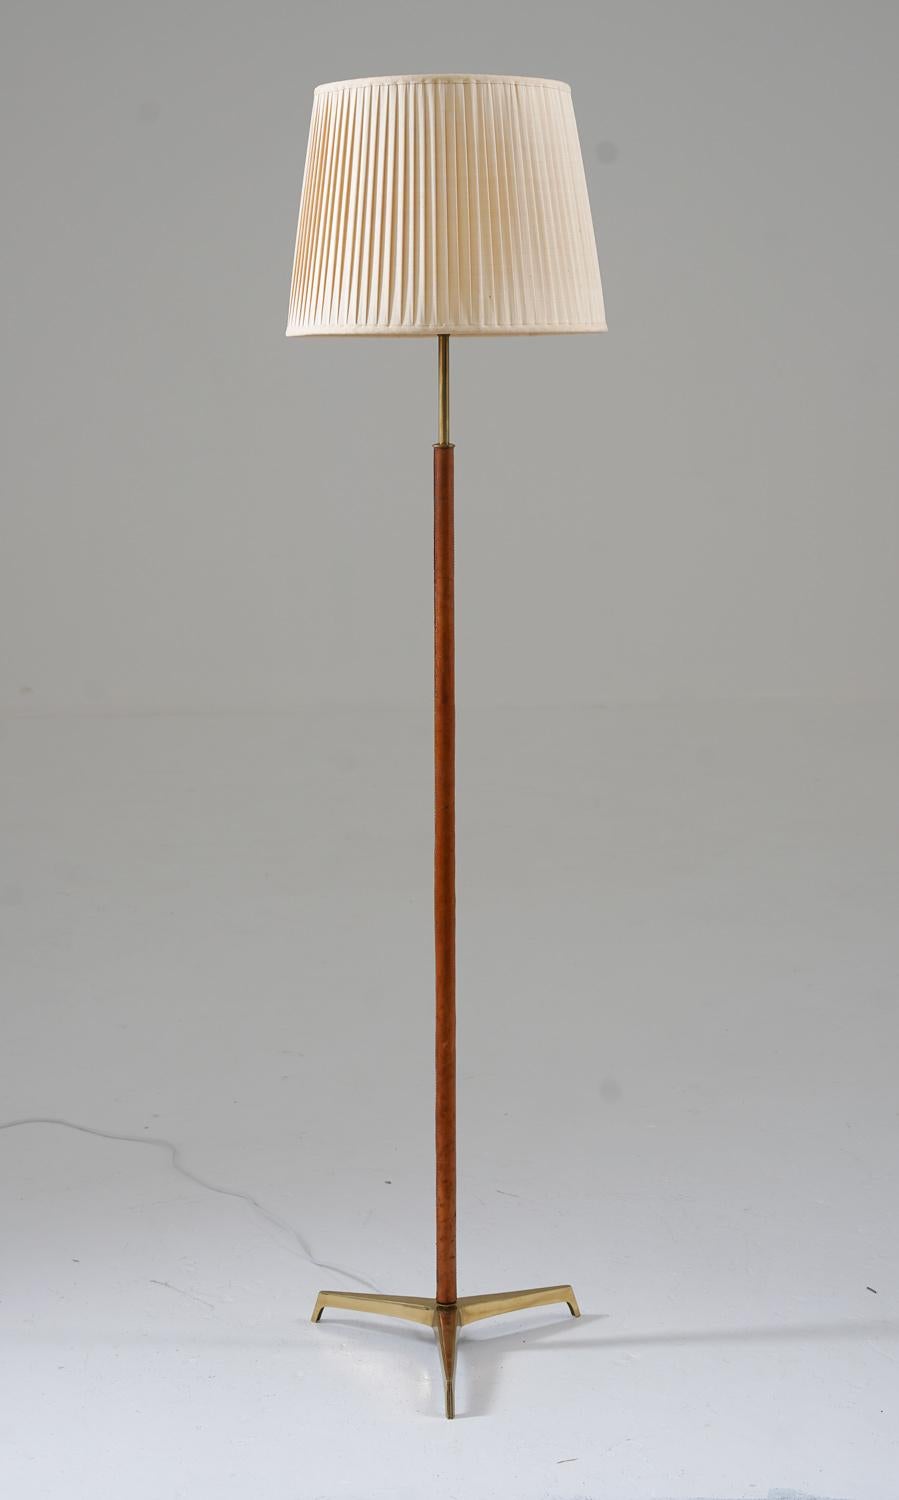 Scandinavian midcentury tripod floor lamp in brass and leather, manufactured in Sweden, 1960s.
This lamp consists of a leather-covered brass base, resting on a tripod foot in solid brass. The lamp comes with a beautiful vintage shade.